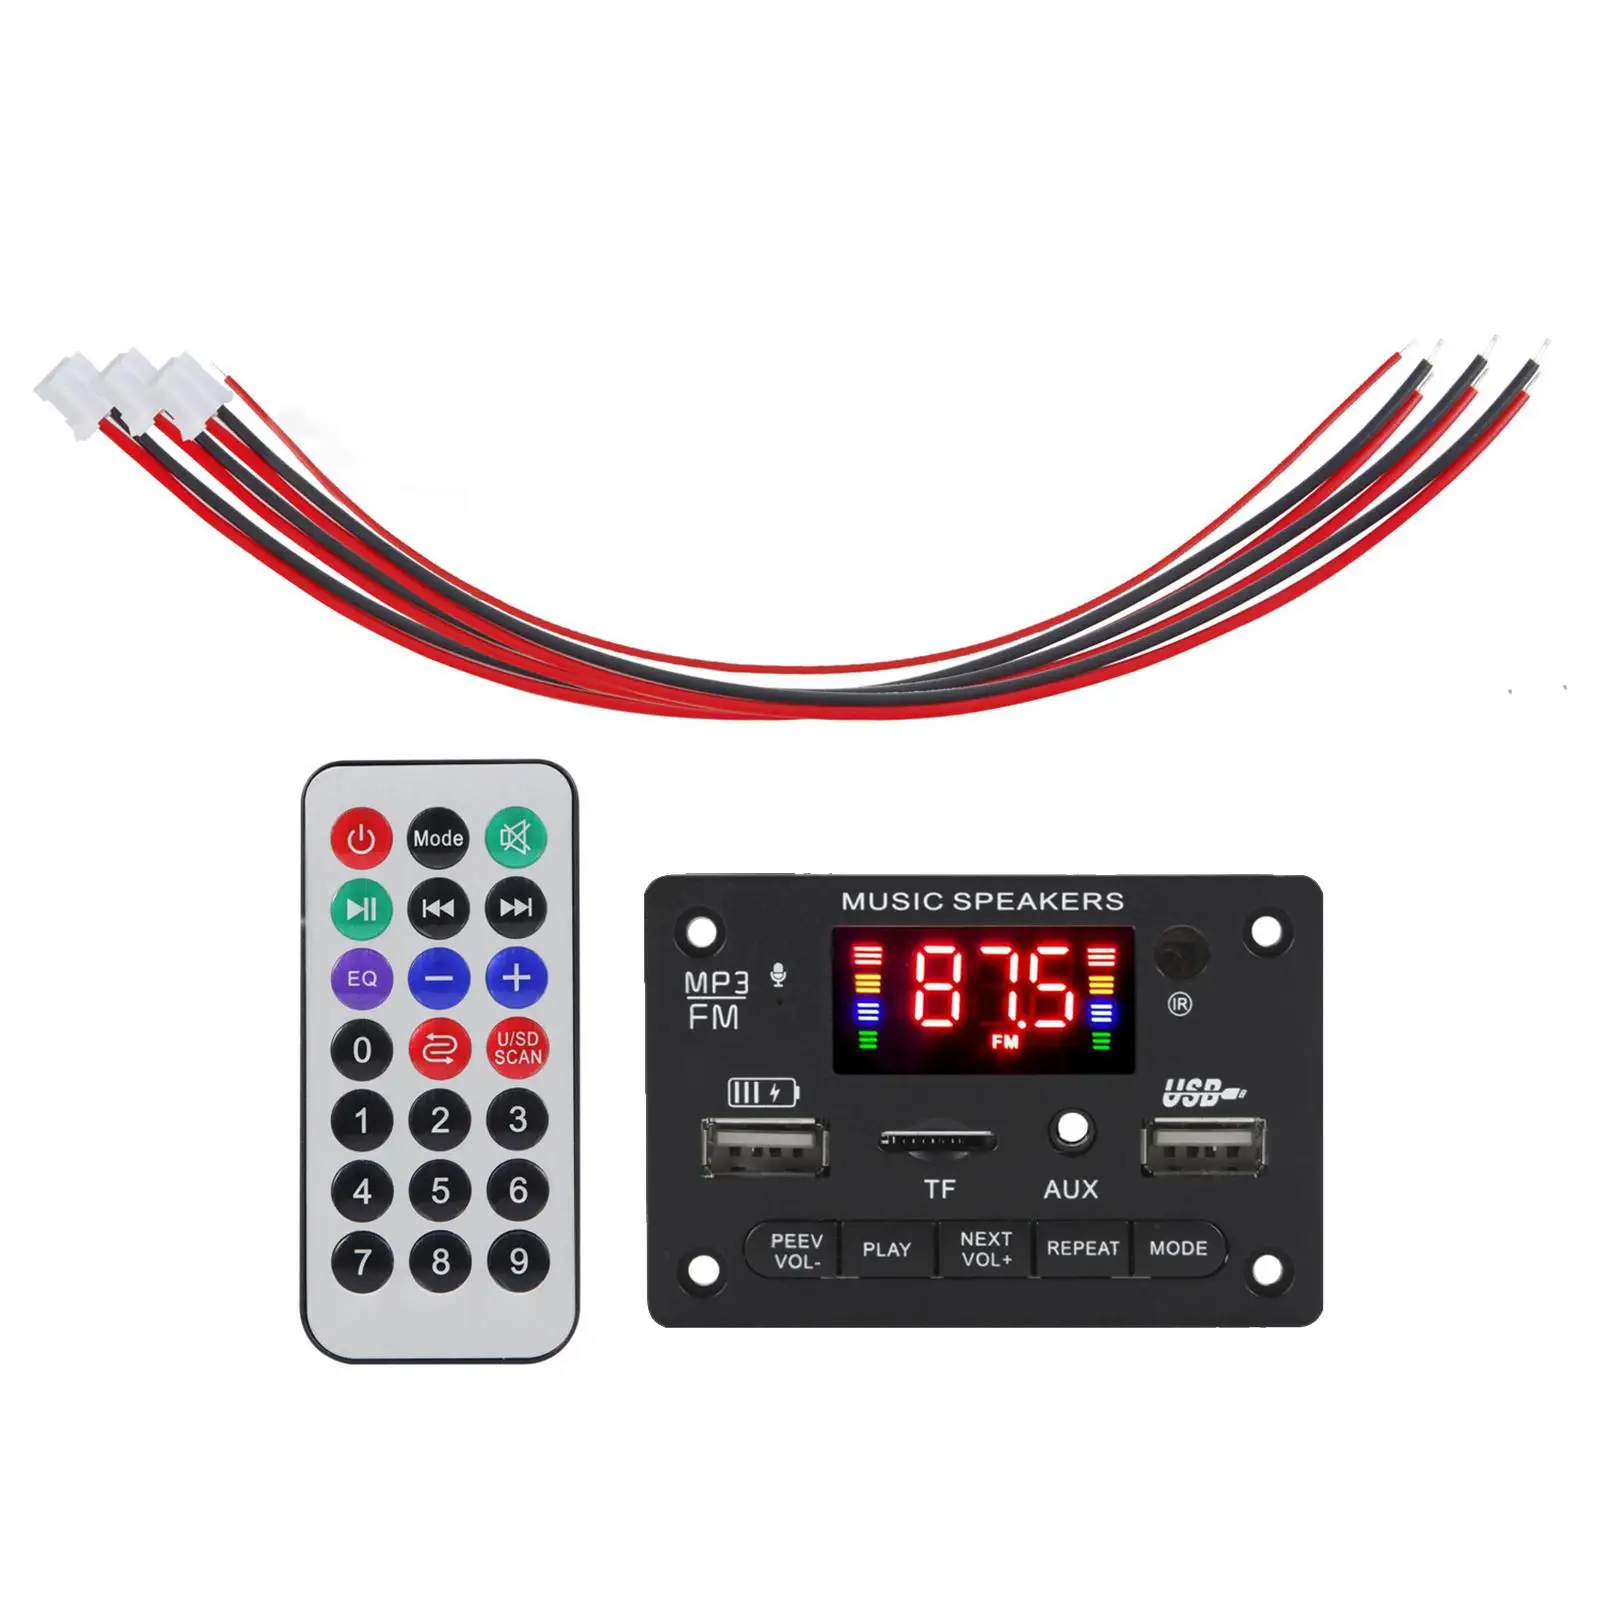 MP3 Decoder Board Hands-Free Call Remote Control BT 5.0 FM Microphone for Speaker